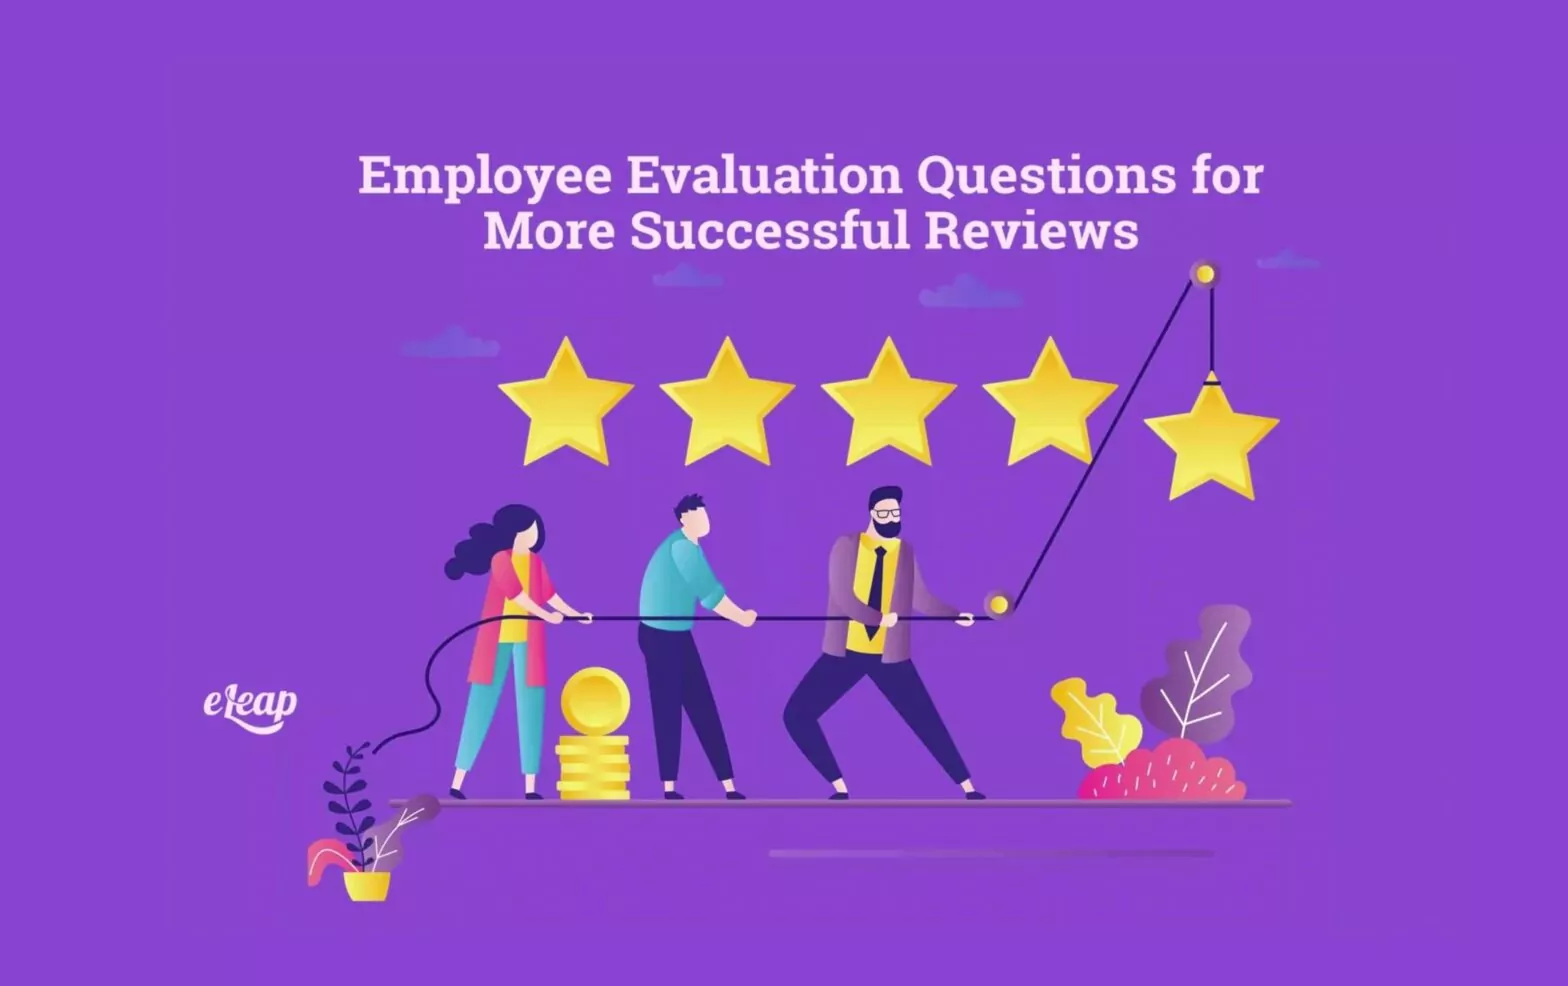 Employee Evaluation Questions for More Successful Reviews